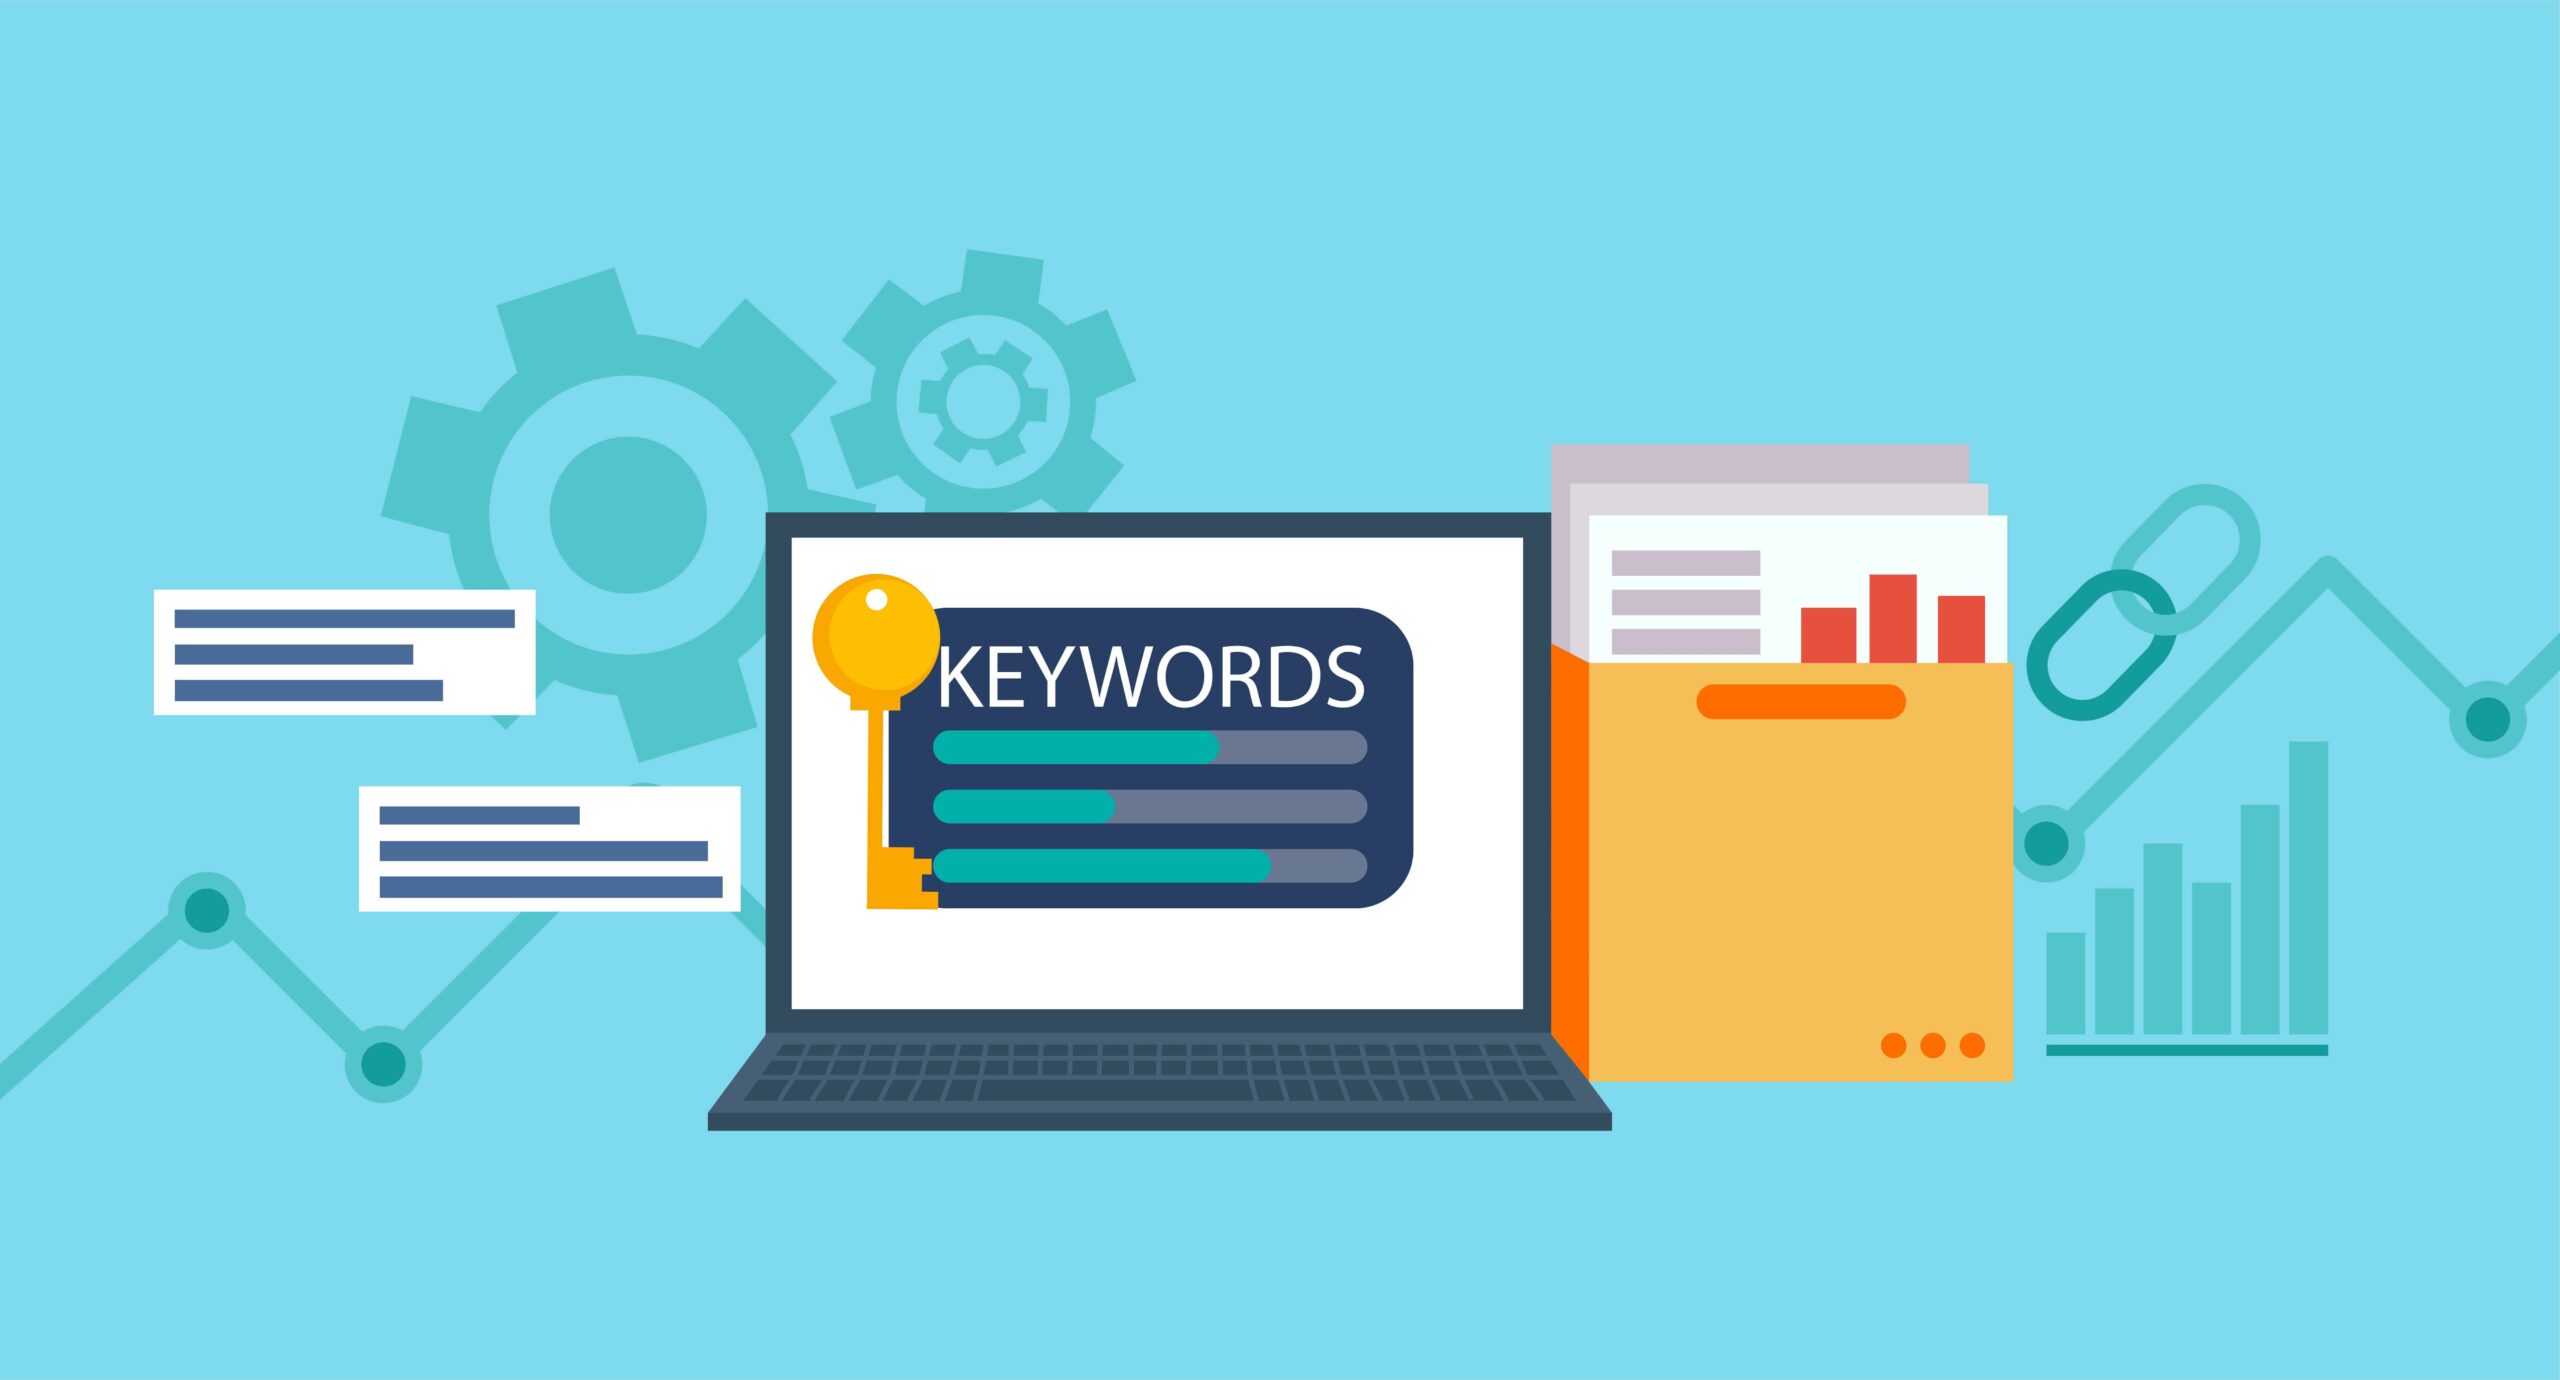 Keyword research and selection